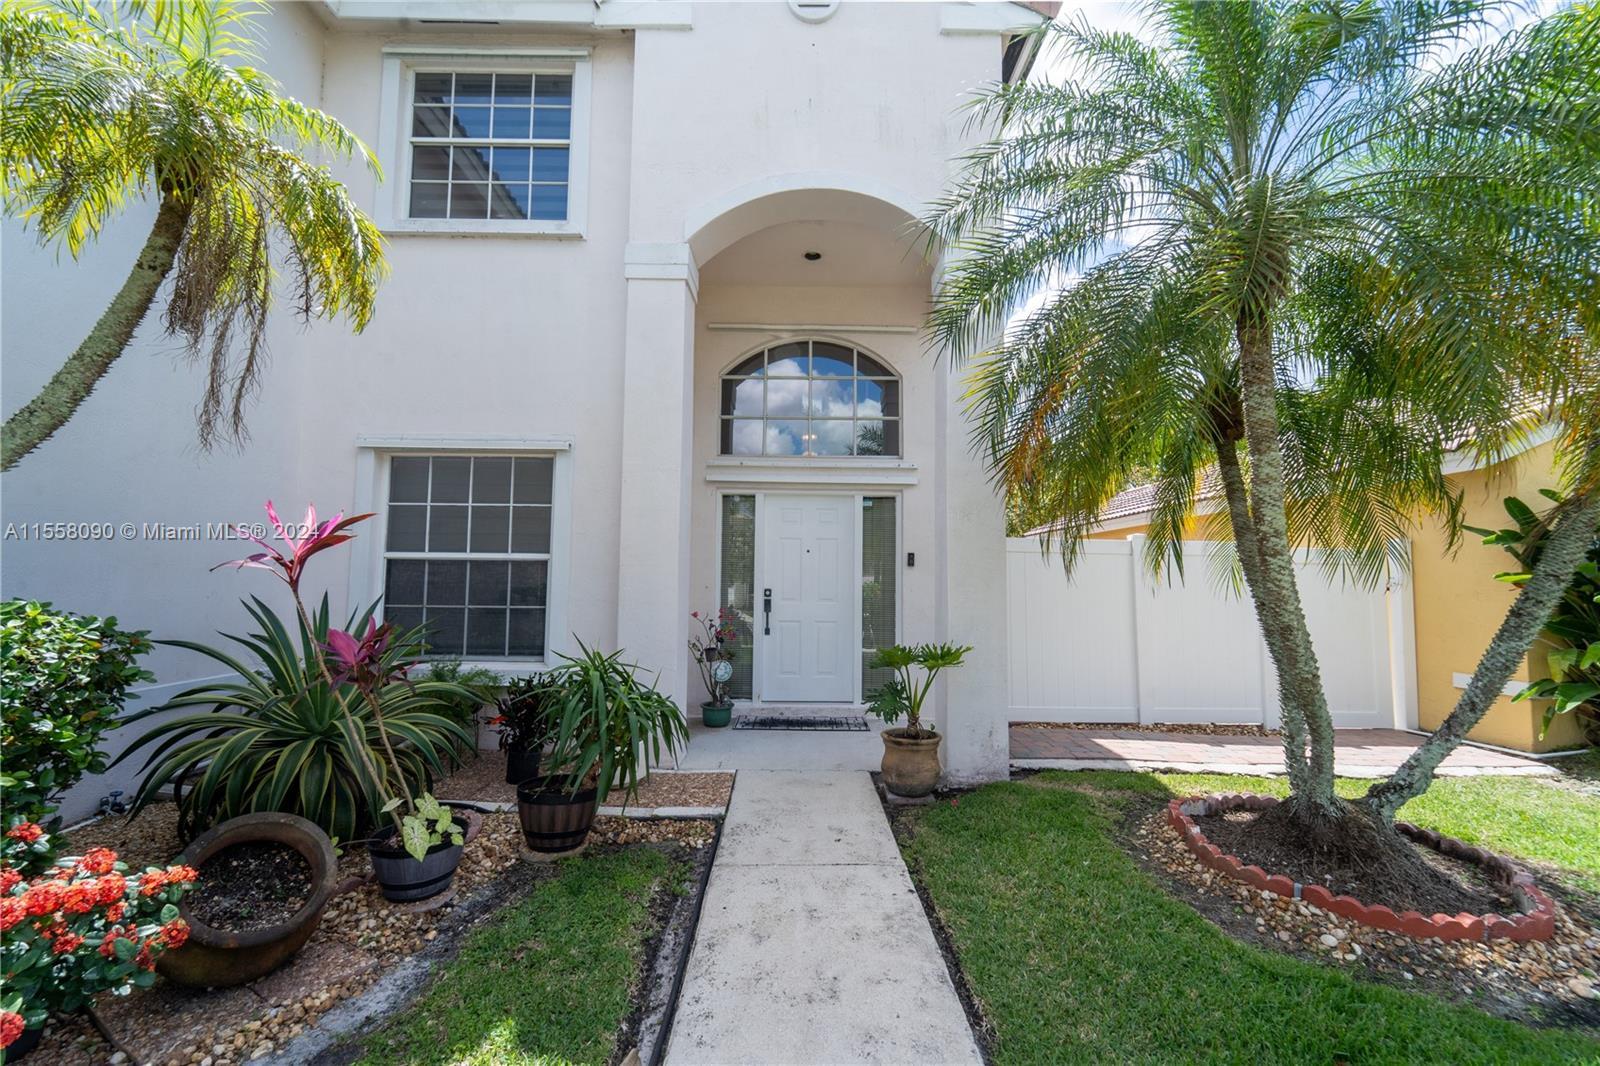 Photo of 18950 NW 10th St in Pembroke Pines, FL